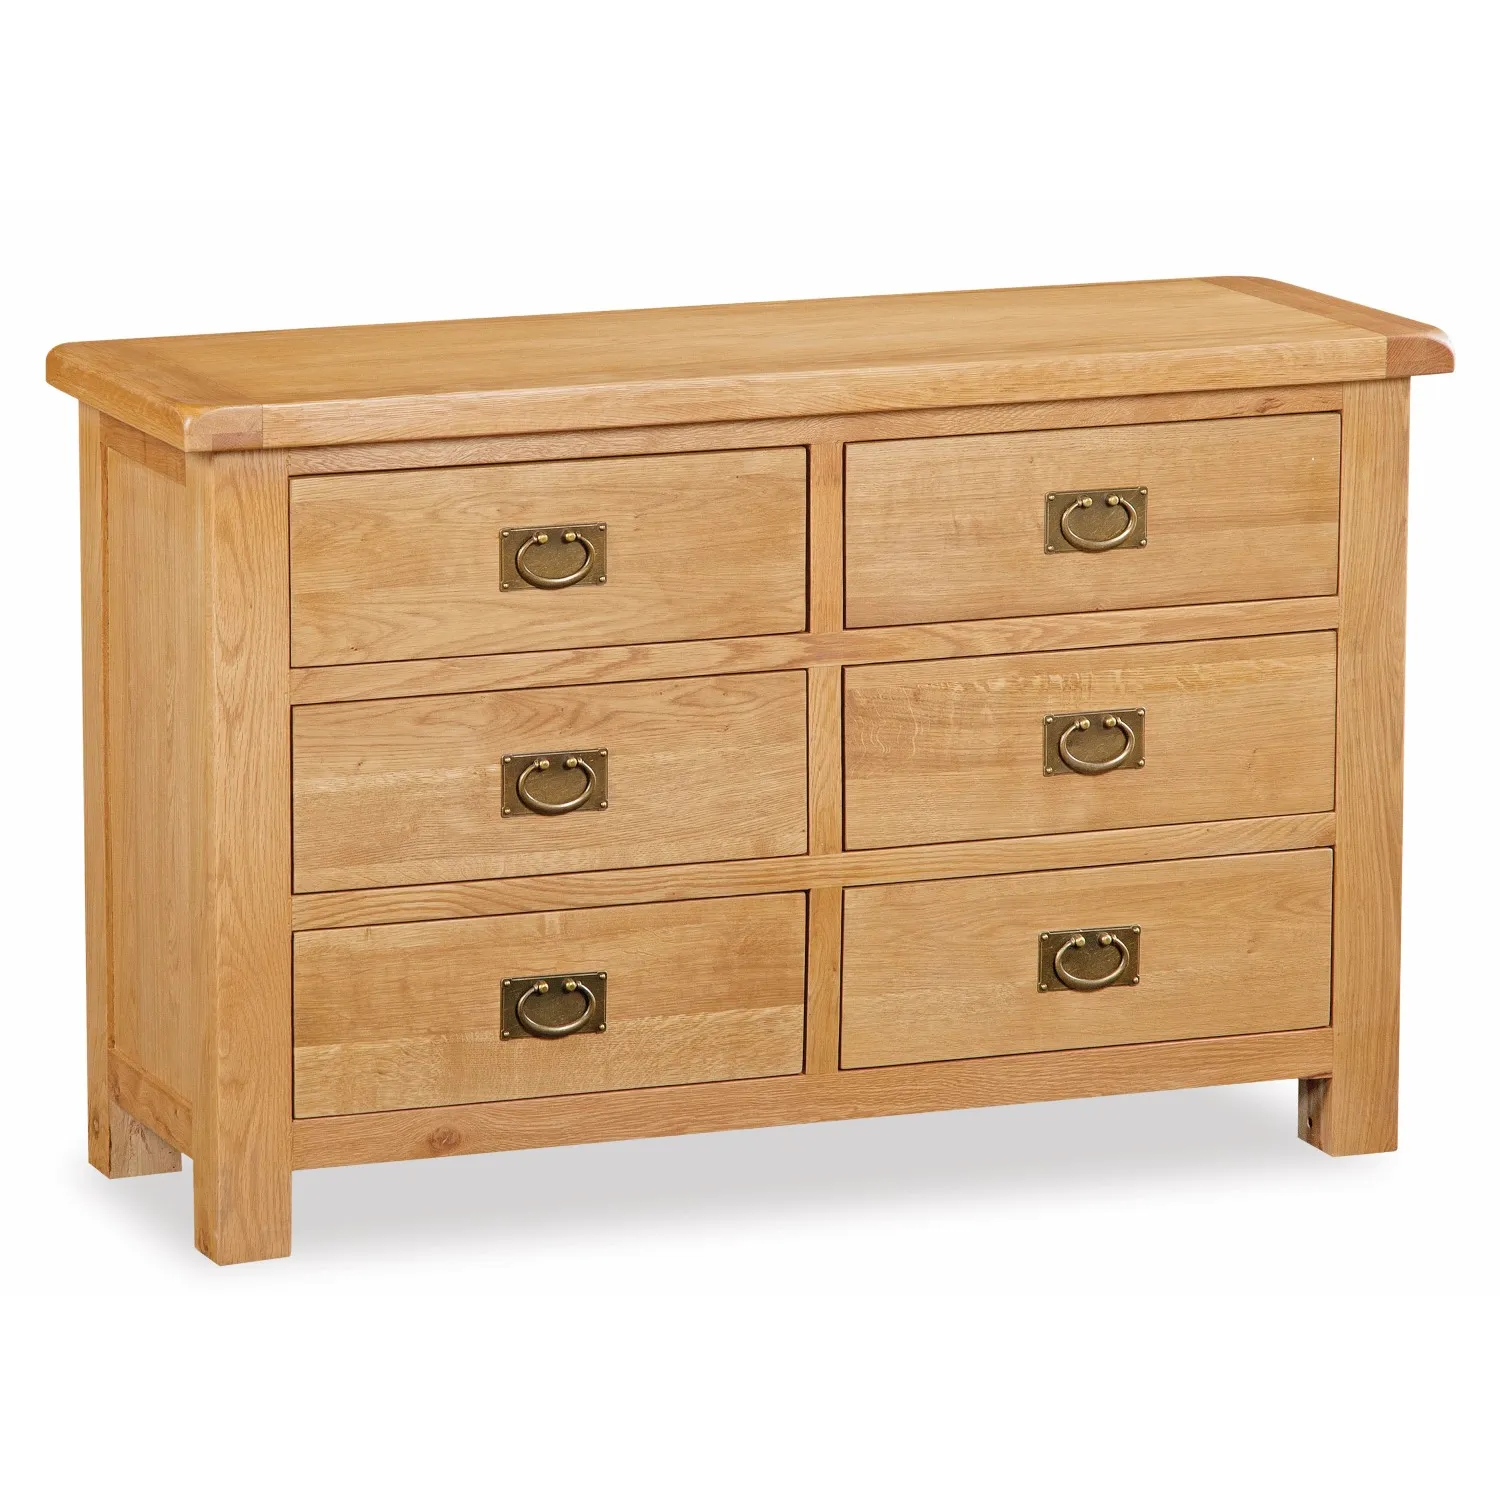 Rustic Solid Oak 6 Drawer Chest